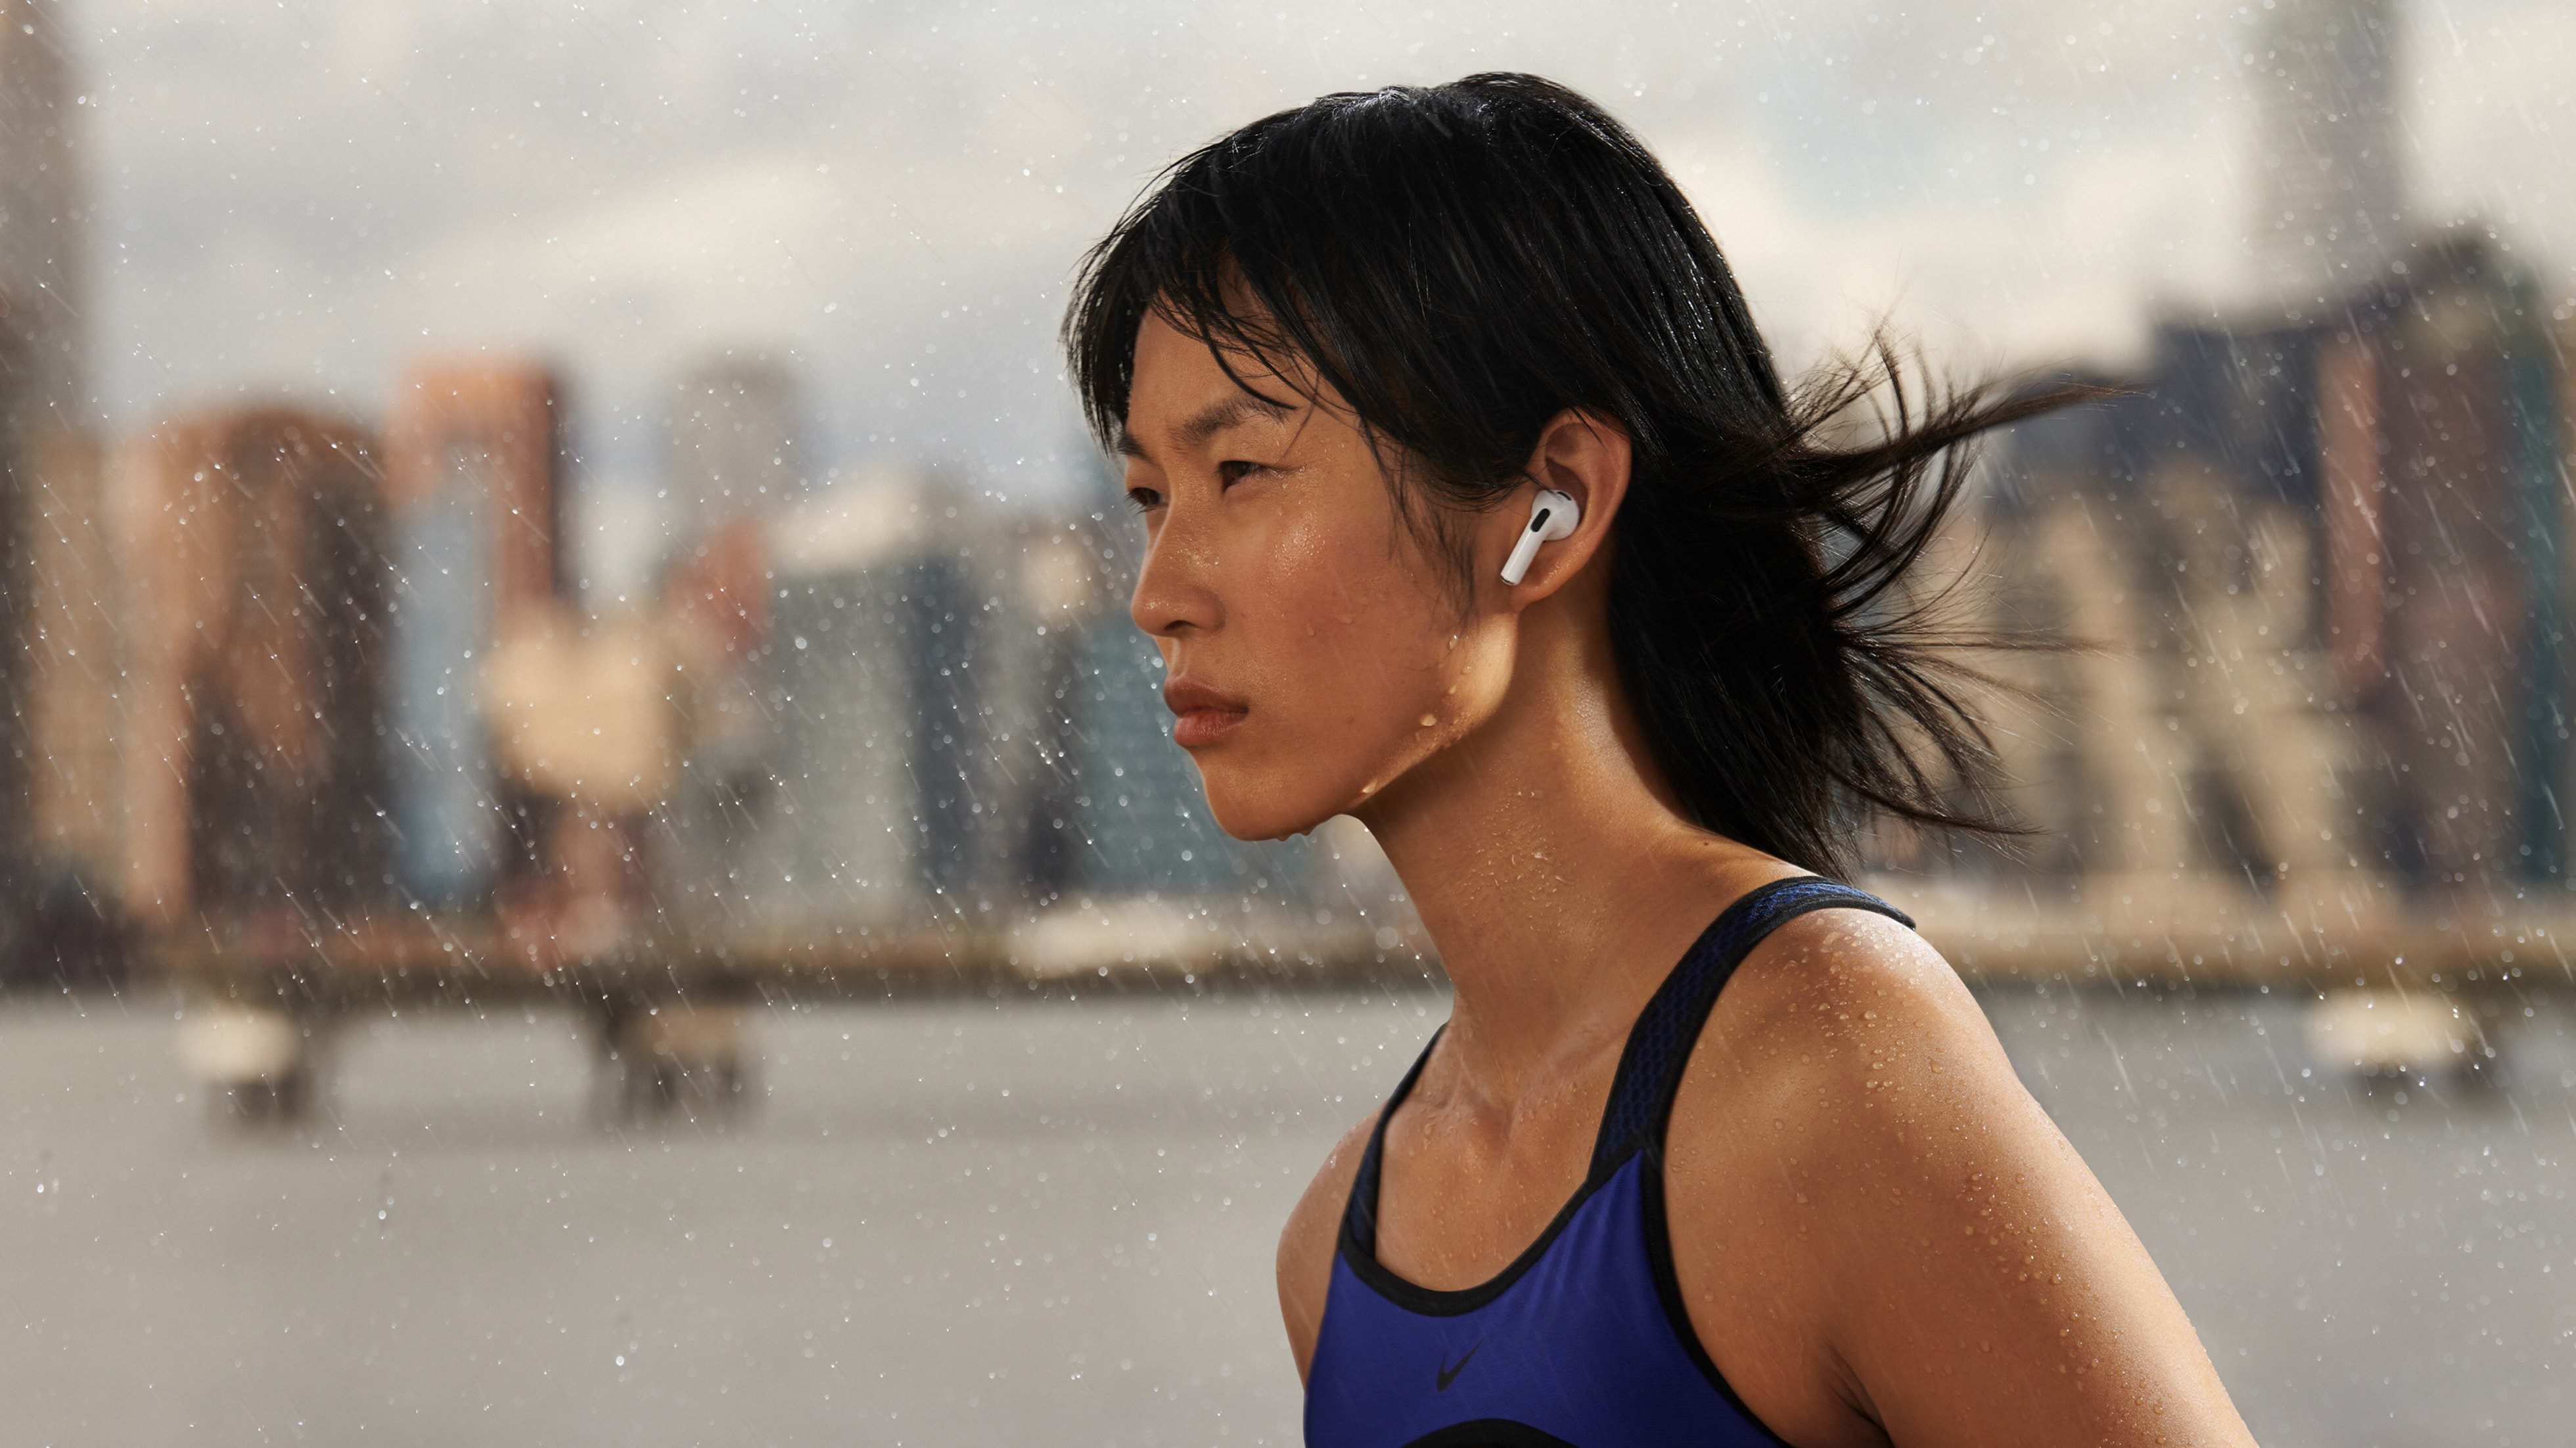 AirPods 3 became the first Apple headphones with waterproof charging case